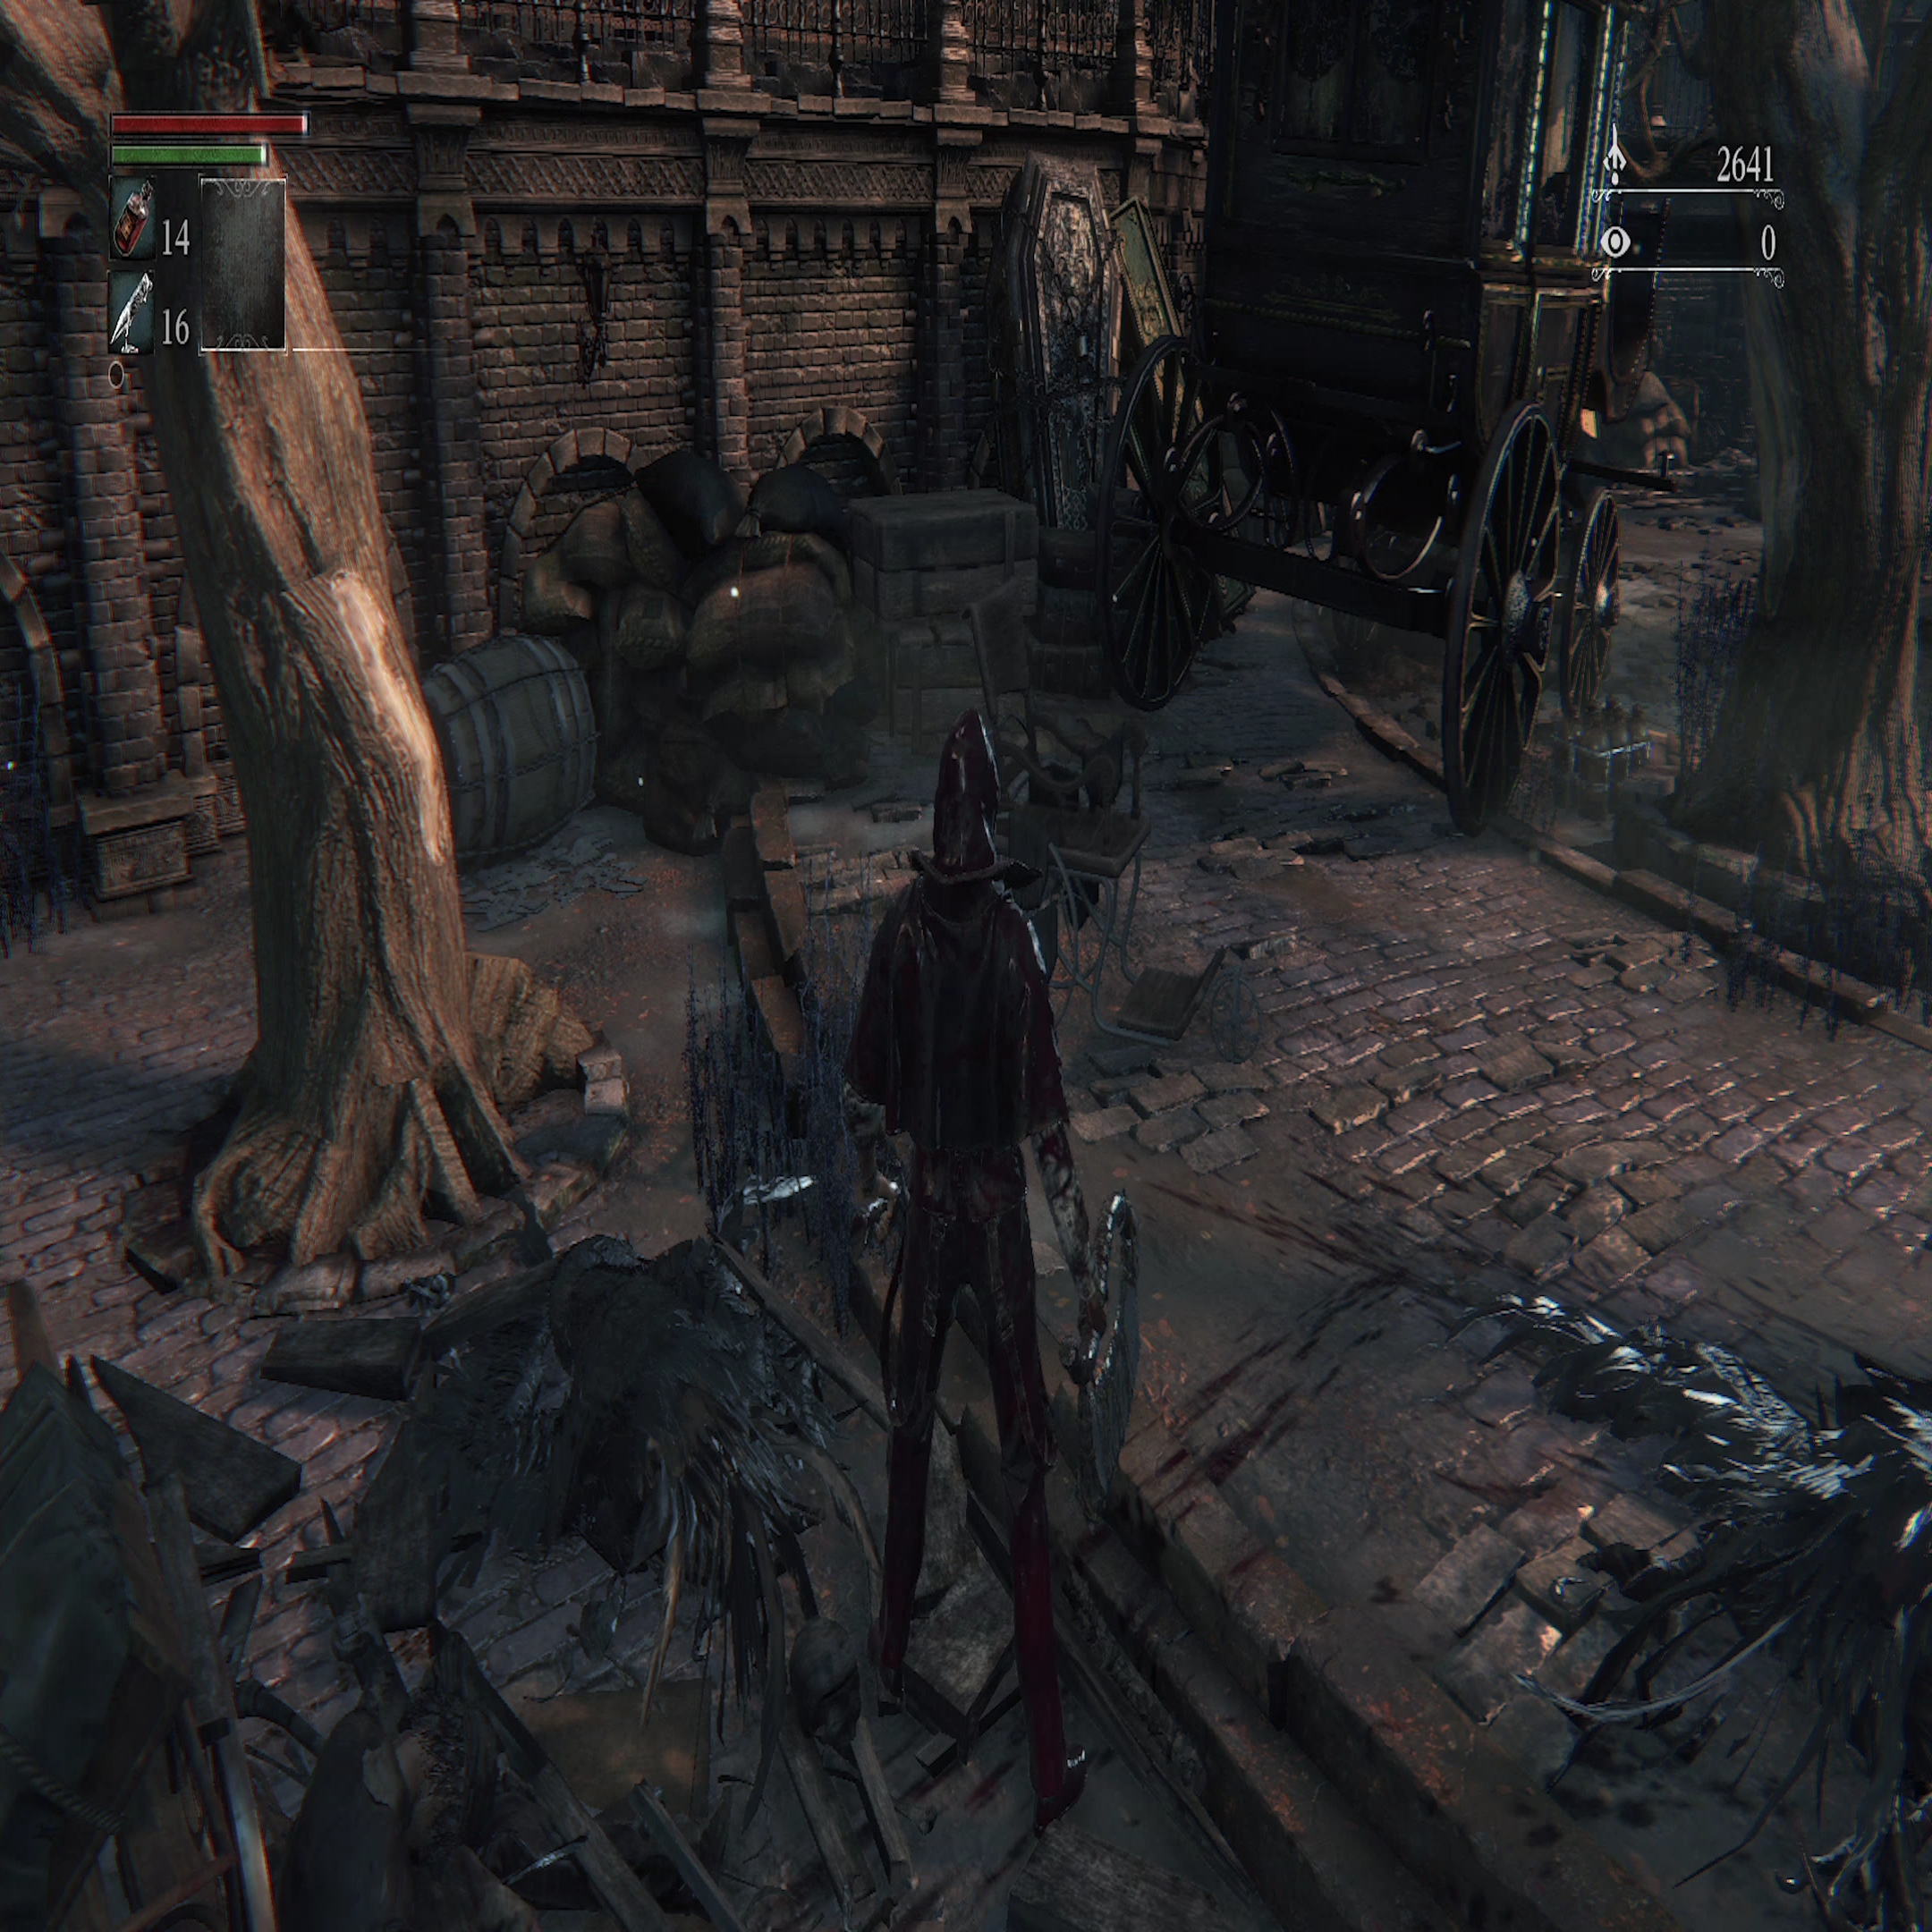 Battle for Bloodborne PS5 Enters New Phase as Modders Port 60fps